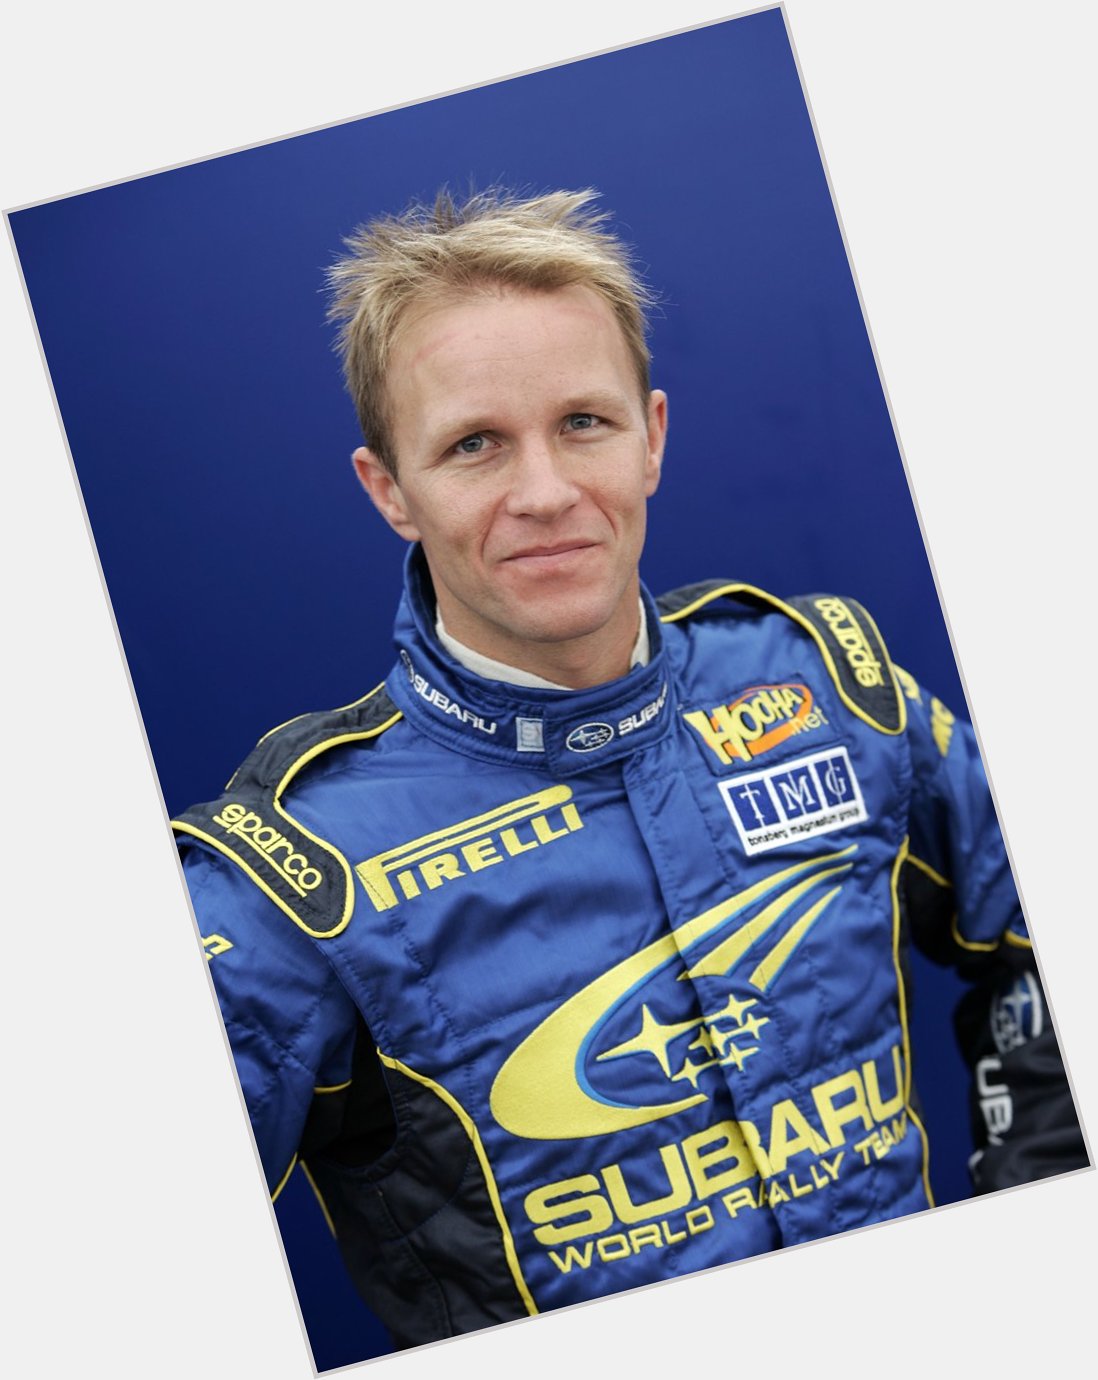 Http://fanpagepress.net/m/P/Petter Solberg Exclusive Hot Pic 3